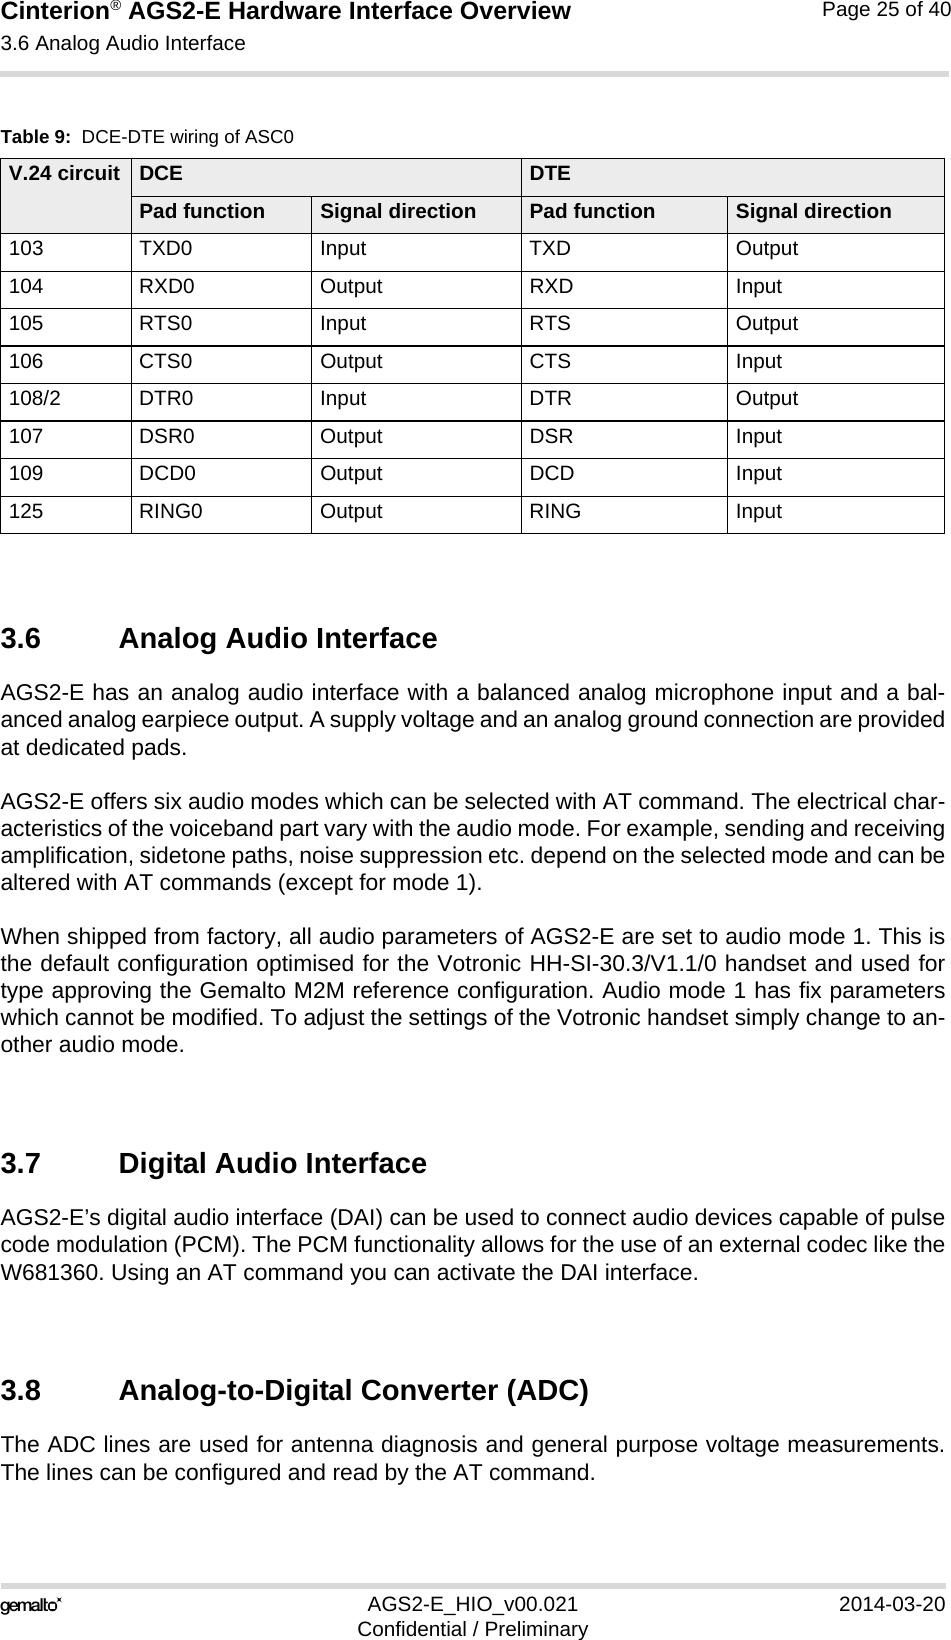 Cinterion® AGS2-E Hardware Interface Overview3.6 Analog Audio Interface27AGS2-E_HIO_v00.021 2014-03-20Confidential / PreliminaryPage 25 of 403.6 Analog Audio InterfaceAGS2-E has an analog audio interface with a balanced analog microphone input and a bal-anced analog earpiece output. A supply voltage and an analog ground connection are providedat dedicated pads.AGS2-E offers six audio modes which can be selected with AT command. The electrical char-acteristics of the voiceband part vary with the audio mode. For example, sending and receivingamplification, sidetone paths, noise suppression etc. depend on the selected mode and can bealtered with AT commands (except for mode 1).When shipped from factory, all audio parameters of AGS2-E are set to audio mode 1. This isthe default configuration optimised for the Votronic HH-SI-30.3/V1.1/0 handset and used fortype approving the Gemalto M2M reference configuration. Audio mode 1 has fix parameterswhich cannot be modified. To adjust the settings of the Votronic handset simply change to an-other audio mode.3.7 Digital Audio InterfaceAGS2-E’s digital audio interface (DAI) can be used to connect audio devices capable of pulsecode modulation (PCM). The PCM functionality allows for the use of an external codec like theW681360. Using an AT command you can activate the DAI interface.3.8 Analog-to-Digital Converter (ADC)The ADC lines are used for antenna diagnosis and general purpose voltage measurements.The lines can be configured and read by the AT command.Table 9:  DCE-DTE wiring of ASC0V.24 circuit DCE DTEPad function Signal direction Pad function Signal direction103 TXD0 Input TXD Output104 RXD0 Output RXD Input105 RTS0 Input RTS Output106 CTS0 Output CTS Input108/2 DTR0 Input DTR Output107 DSR0 Output DSR Input109 DCD0 Output DCD Input125 RING0 Output RING Input